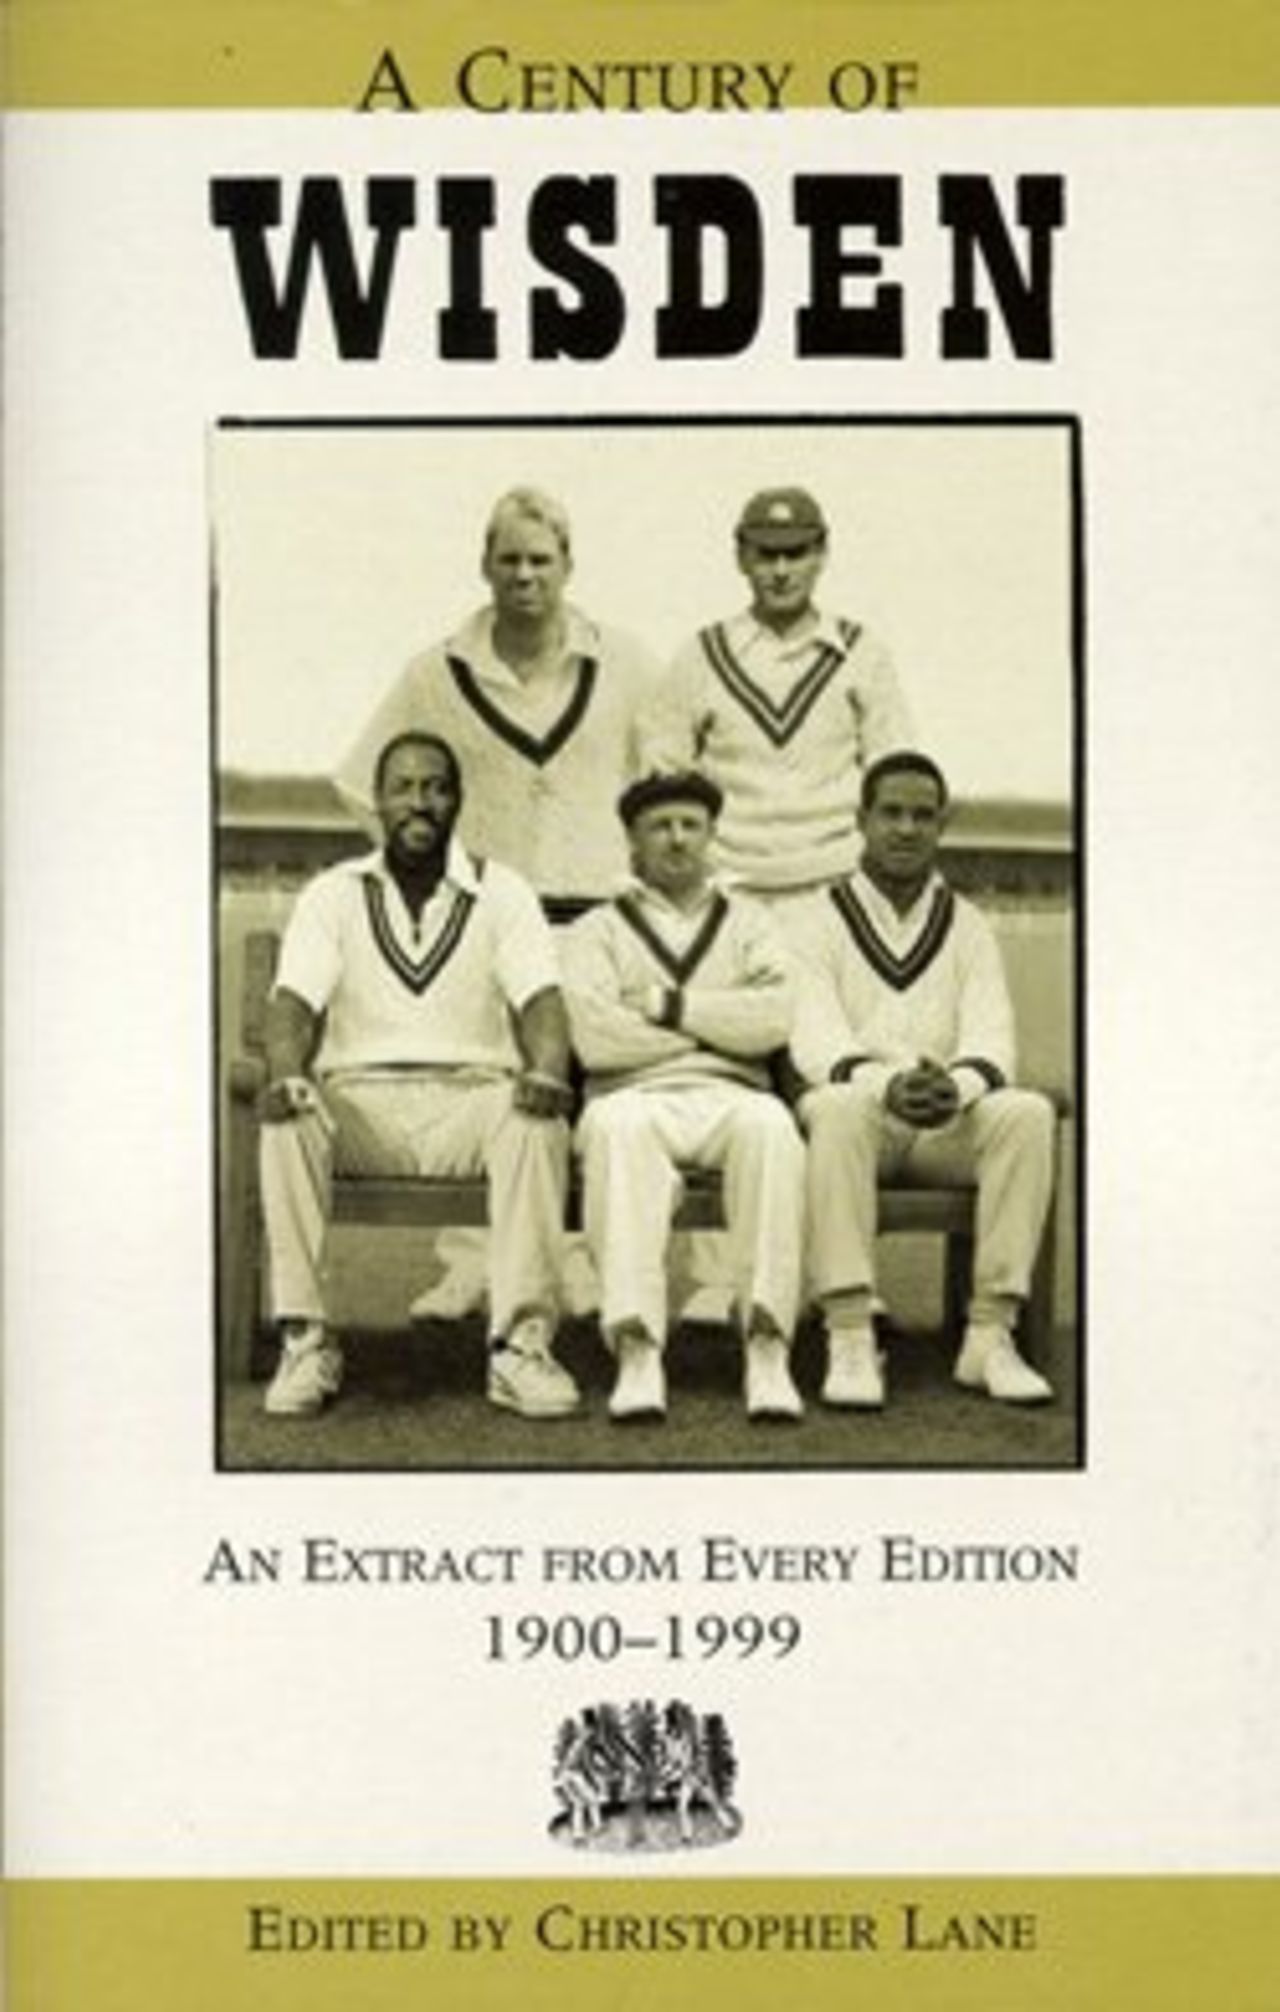 The companion volume to this year's Almanack, which features one item from every edition of Wisden from 1900-99. This cover includes a mocked-up team photo of the Five Cricketers of the Century.